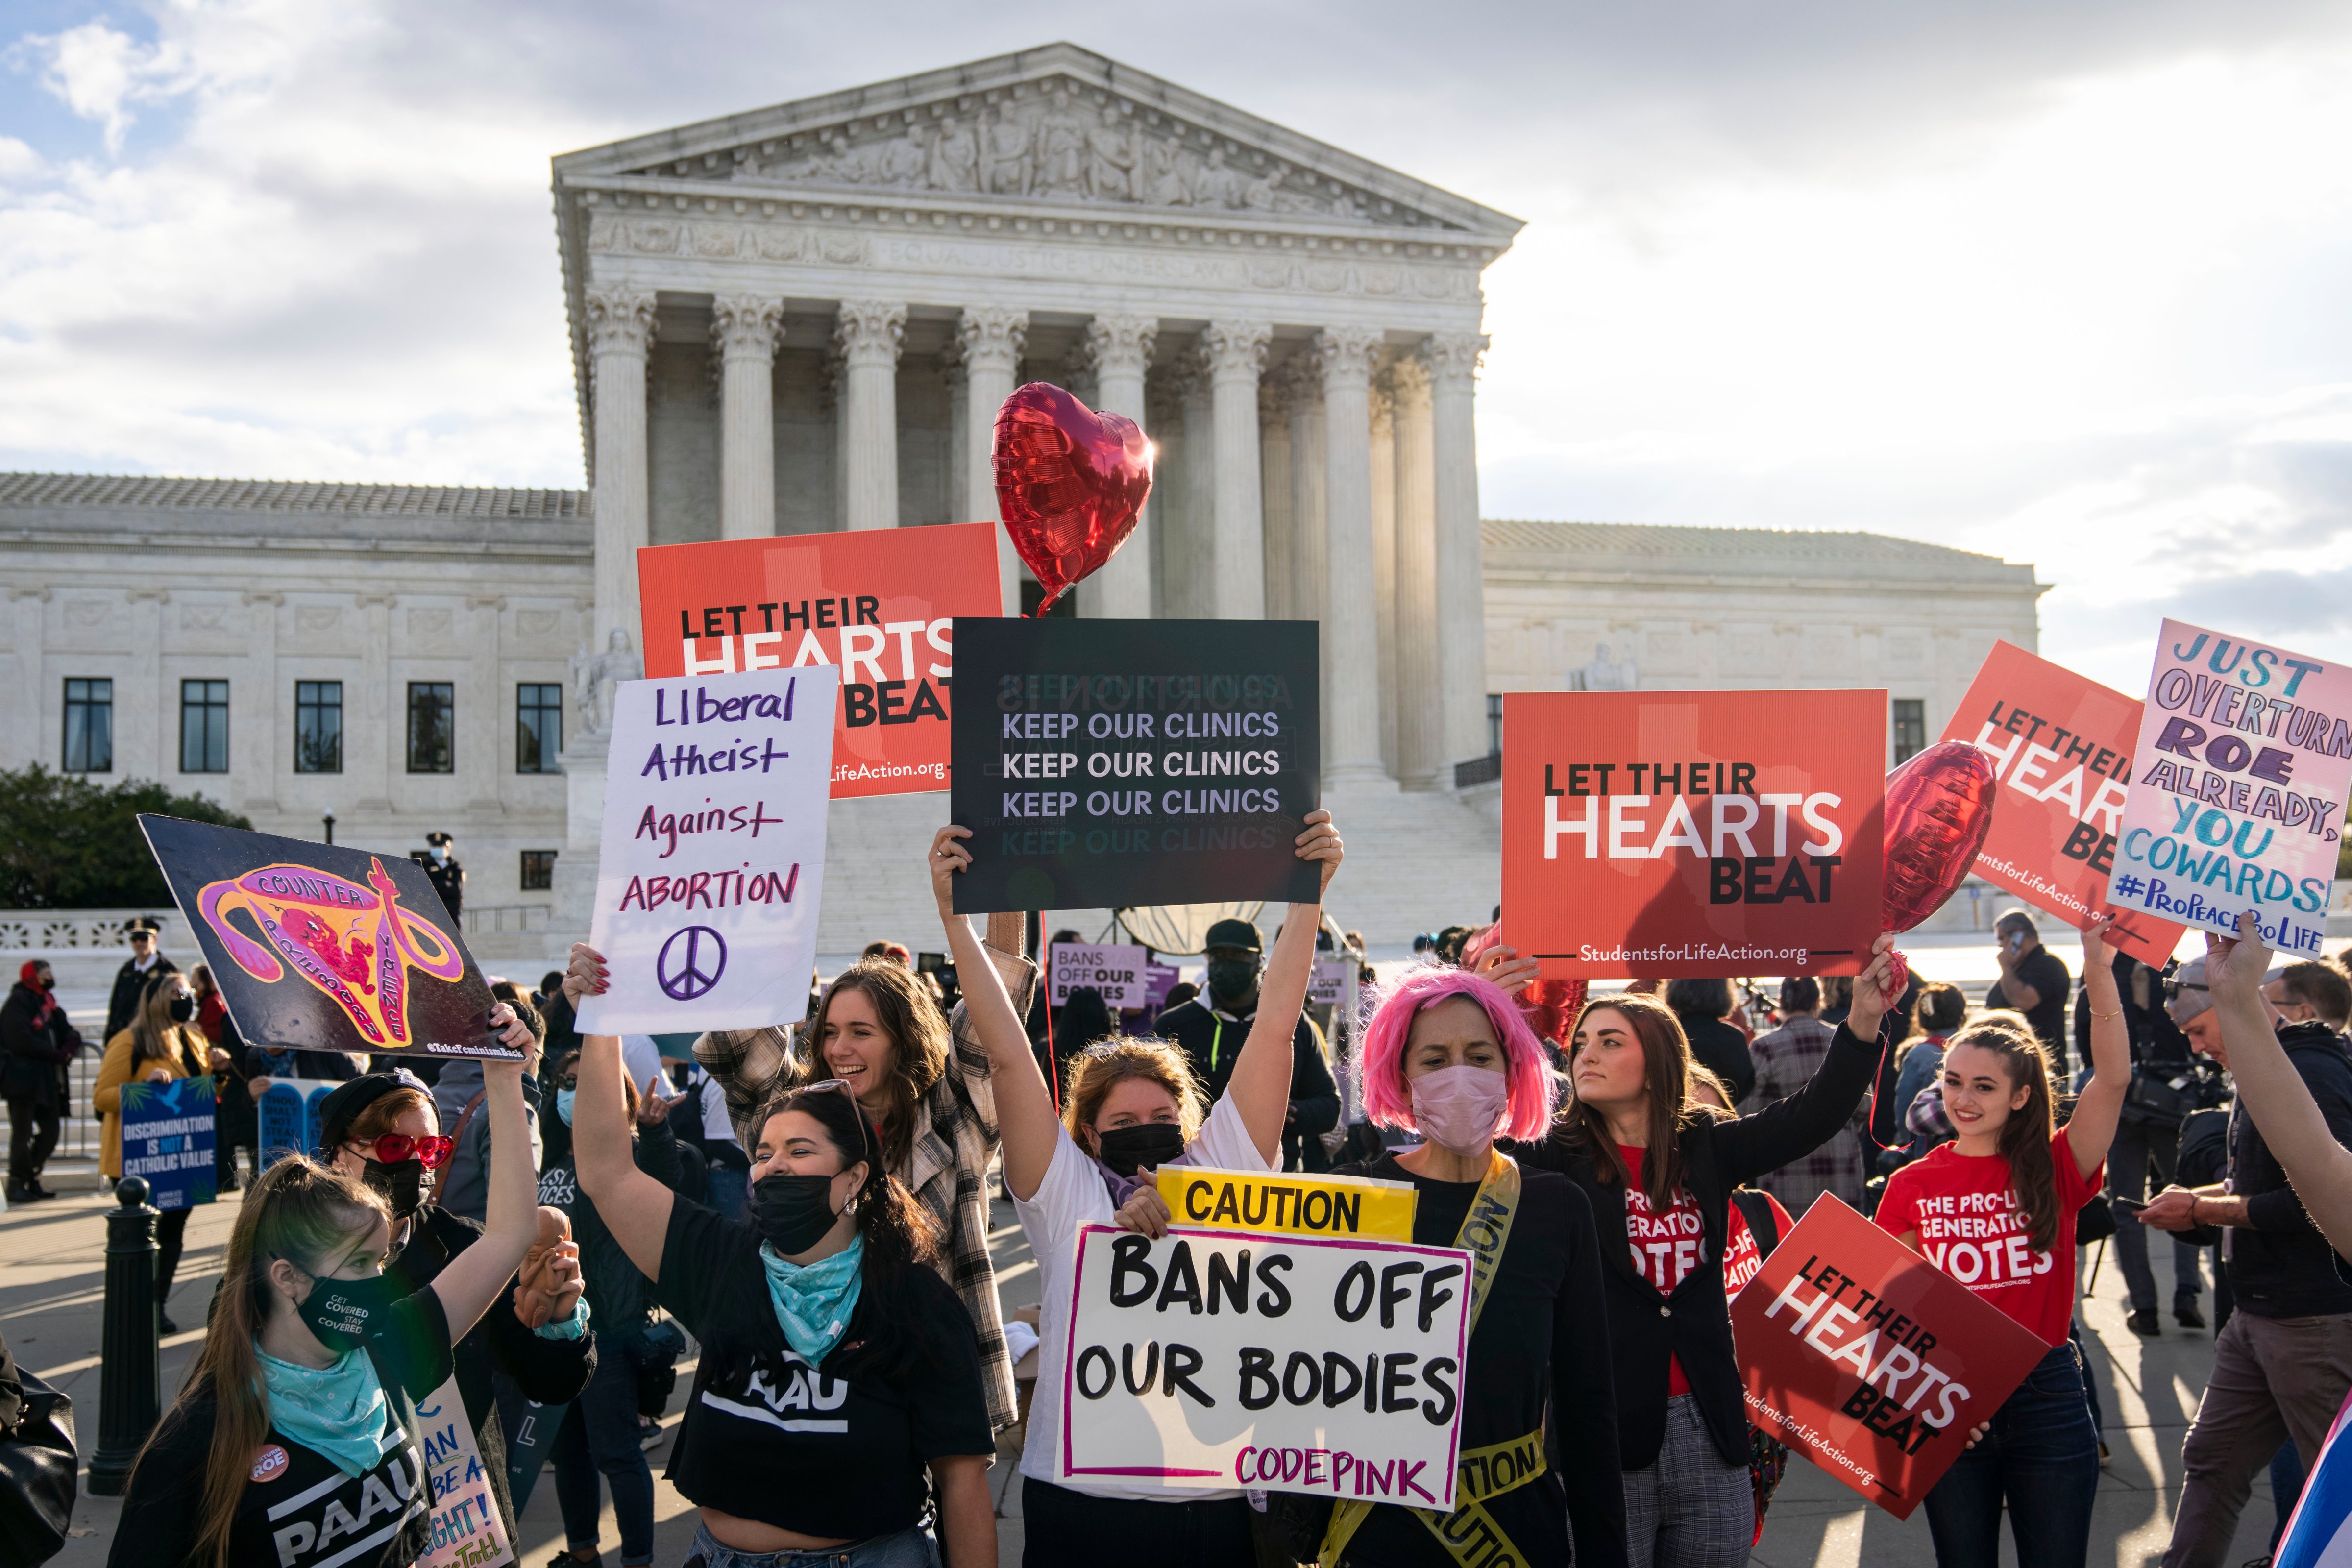 Pro-choice and anti-abortion demonstrators rally outside the U.S. Supreme Court on November 1. The Supreme Court is hearing arguments in a challenge to the controversial Texas abortion law which bans abortions after 6 weeks. (Photo by Drew Angerer—Getty Images)